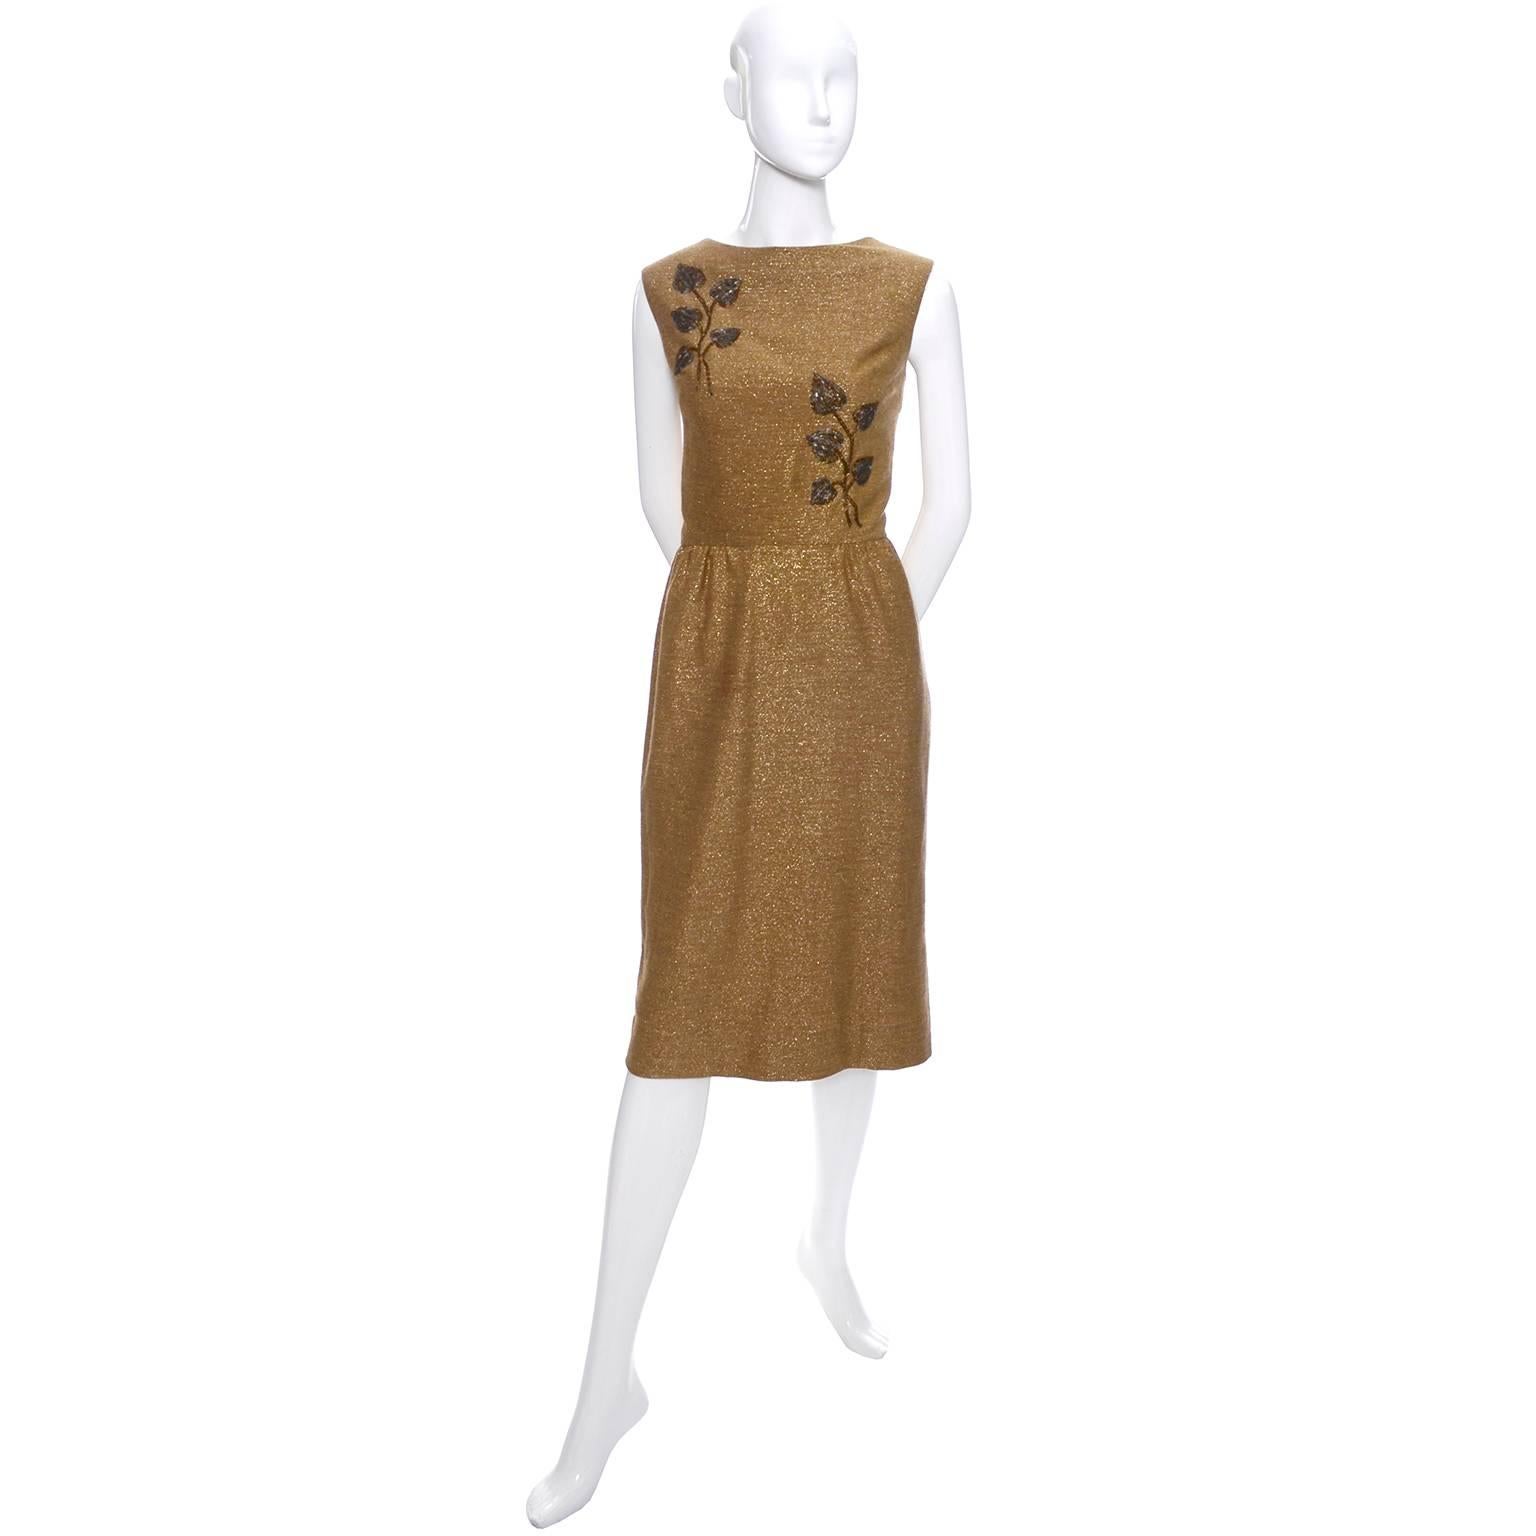 This is a stunning vintage sleeveless gold cocktail dress with beautiful beading by Carlye from the 1960's. The fabulous cocktail dress is approximately a modern day US size 8, but please press "continue reading" below the description to